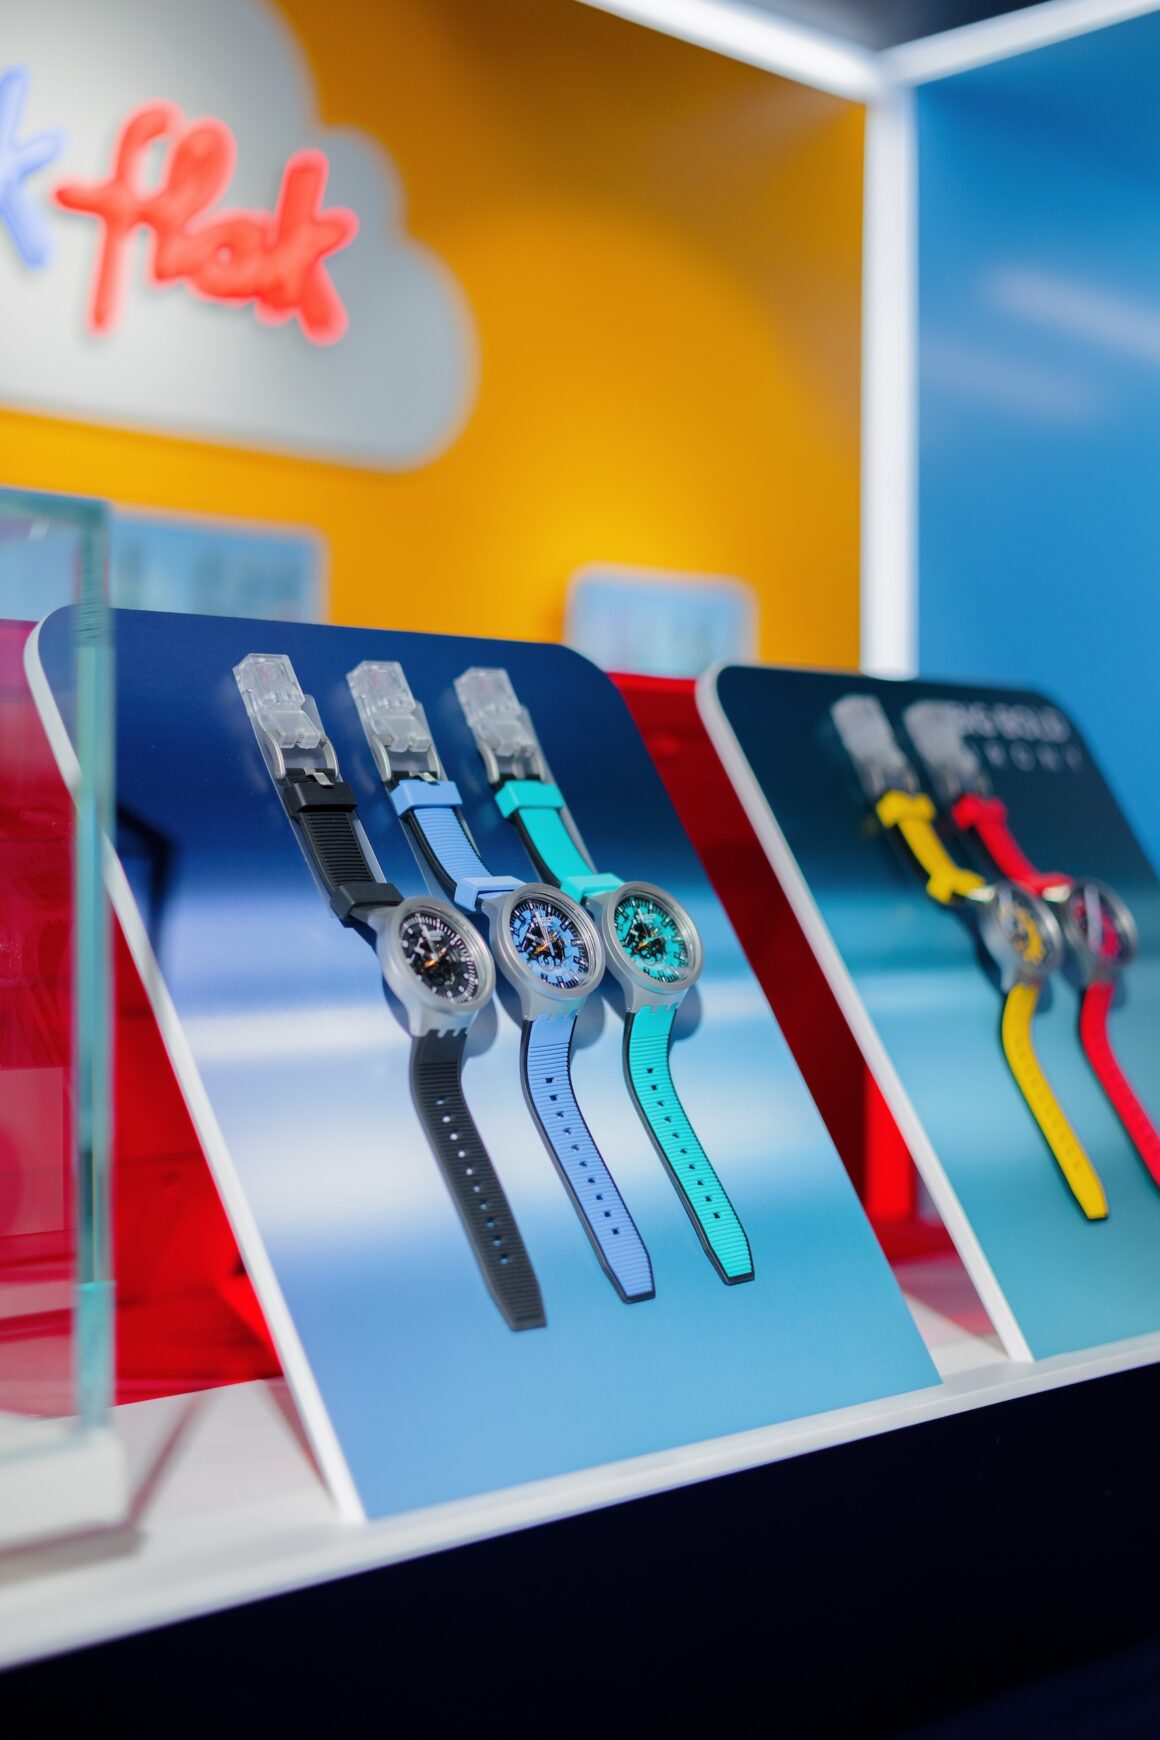 SWATCH ANNOUNCES OPENING OF ITS FIRST CANADIAN FLAGSHIP STORE IN VANCOUVER, BRITISH COLUMBIA